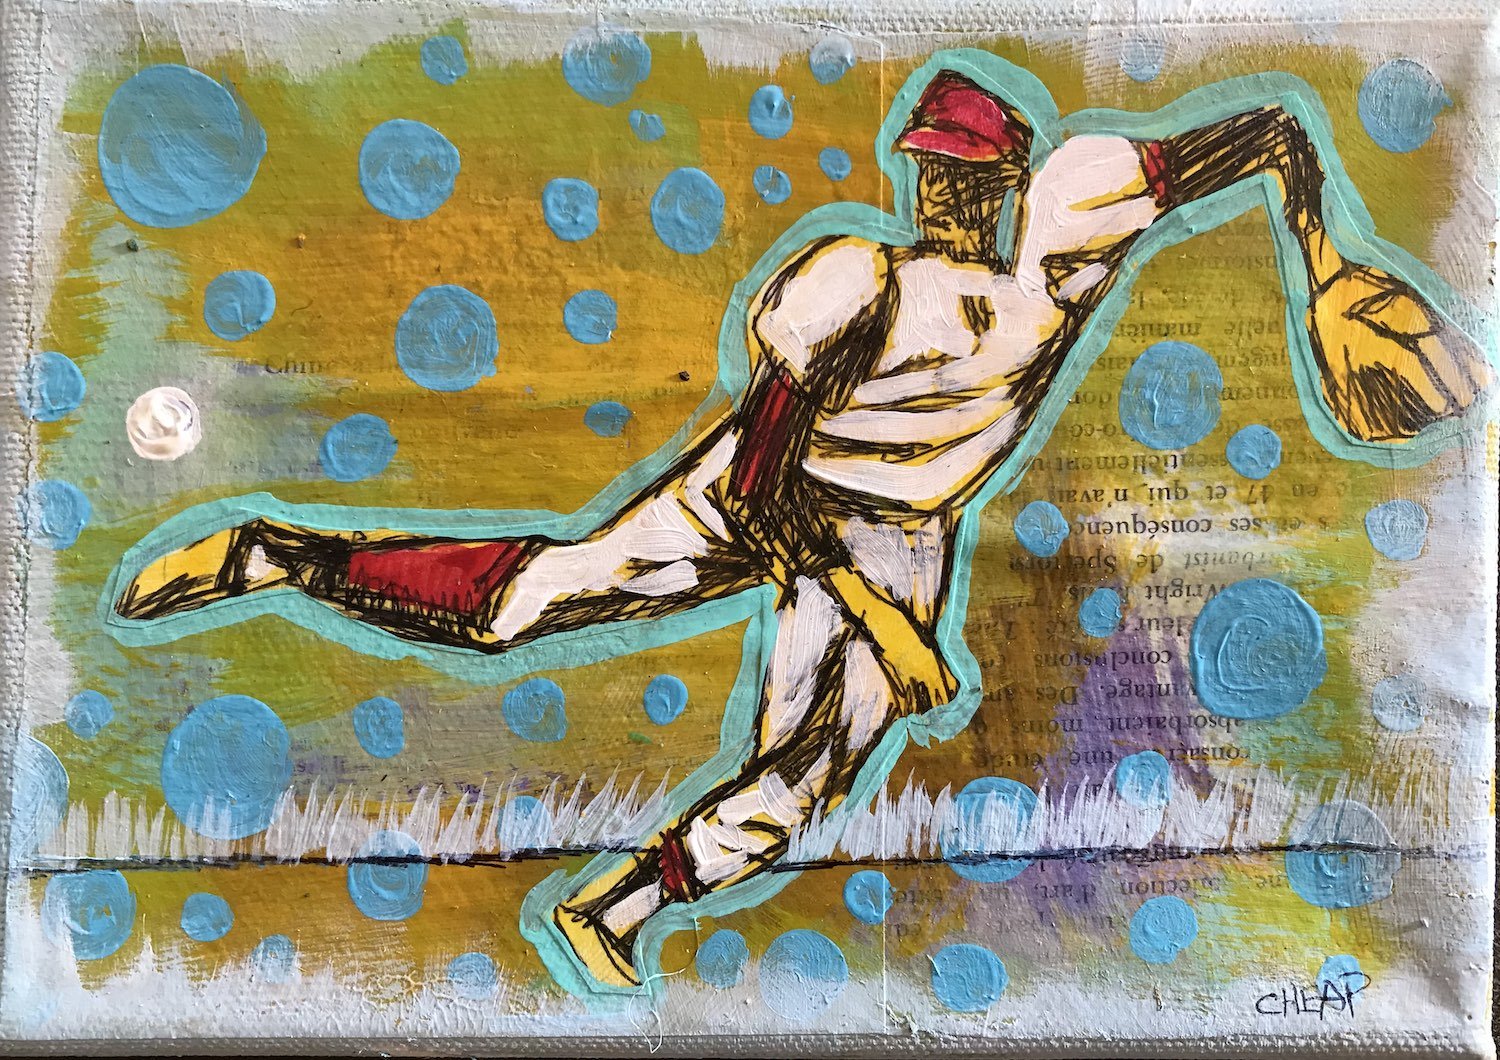 Pitcher follow through painting by Vincent Cheap.